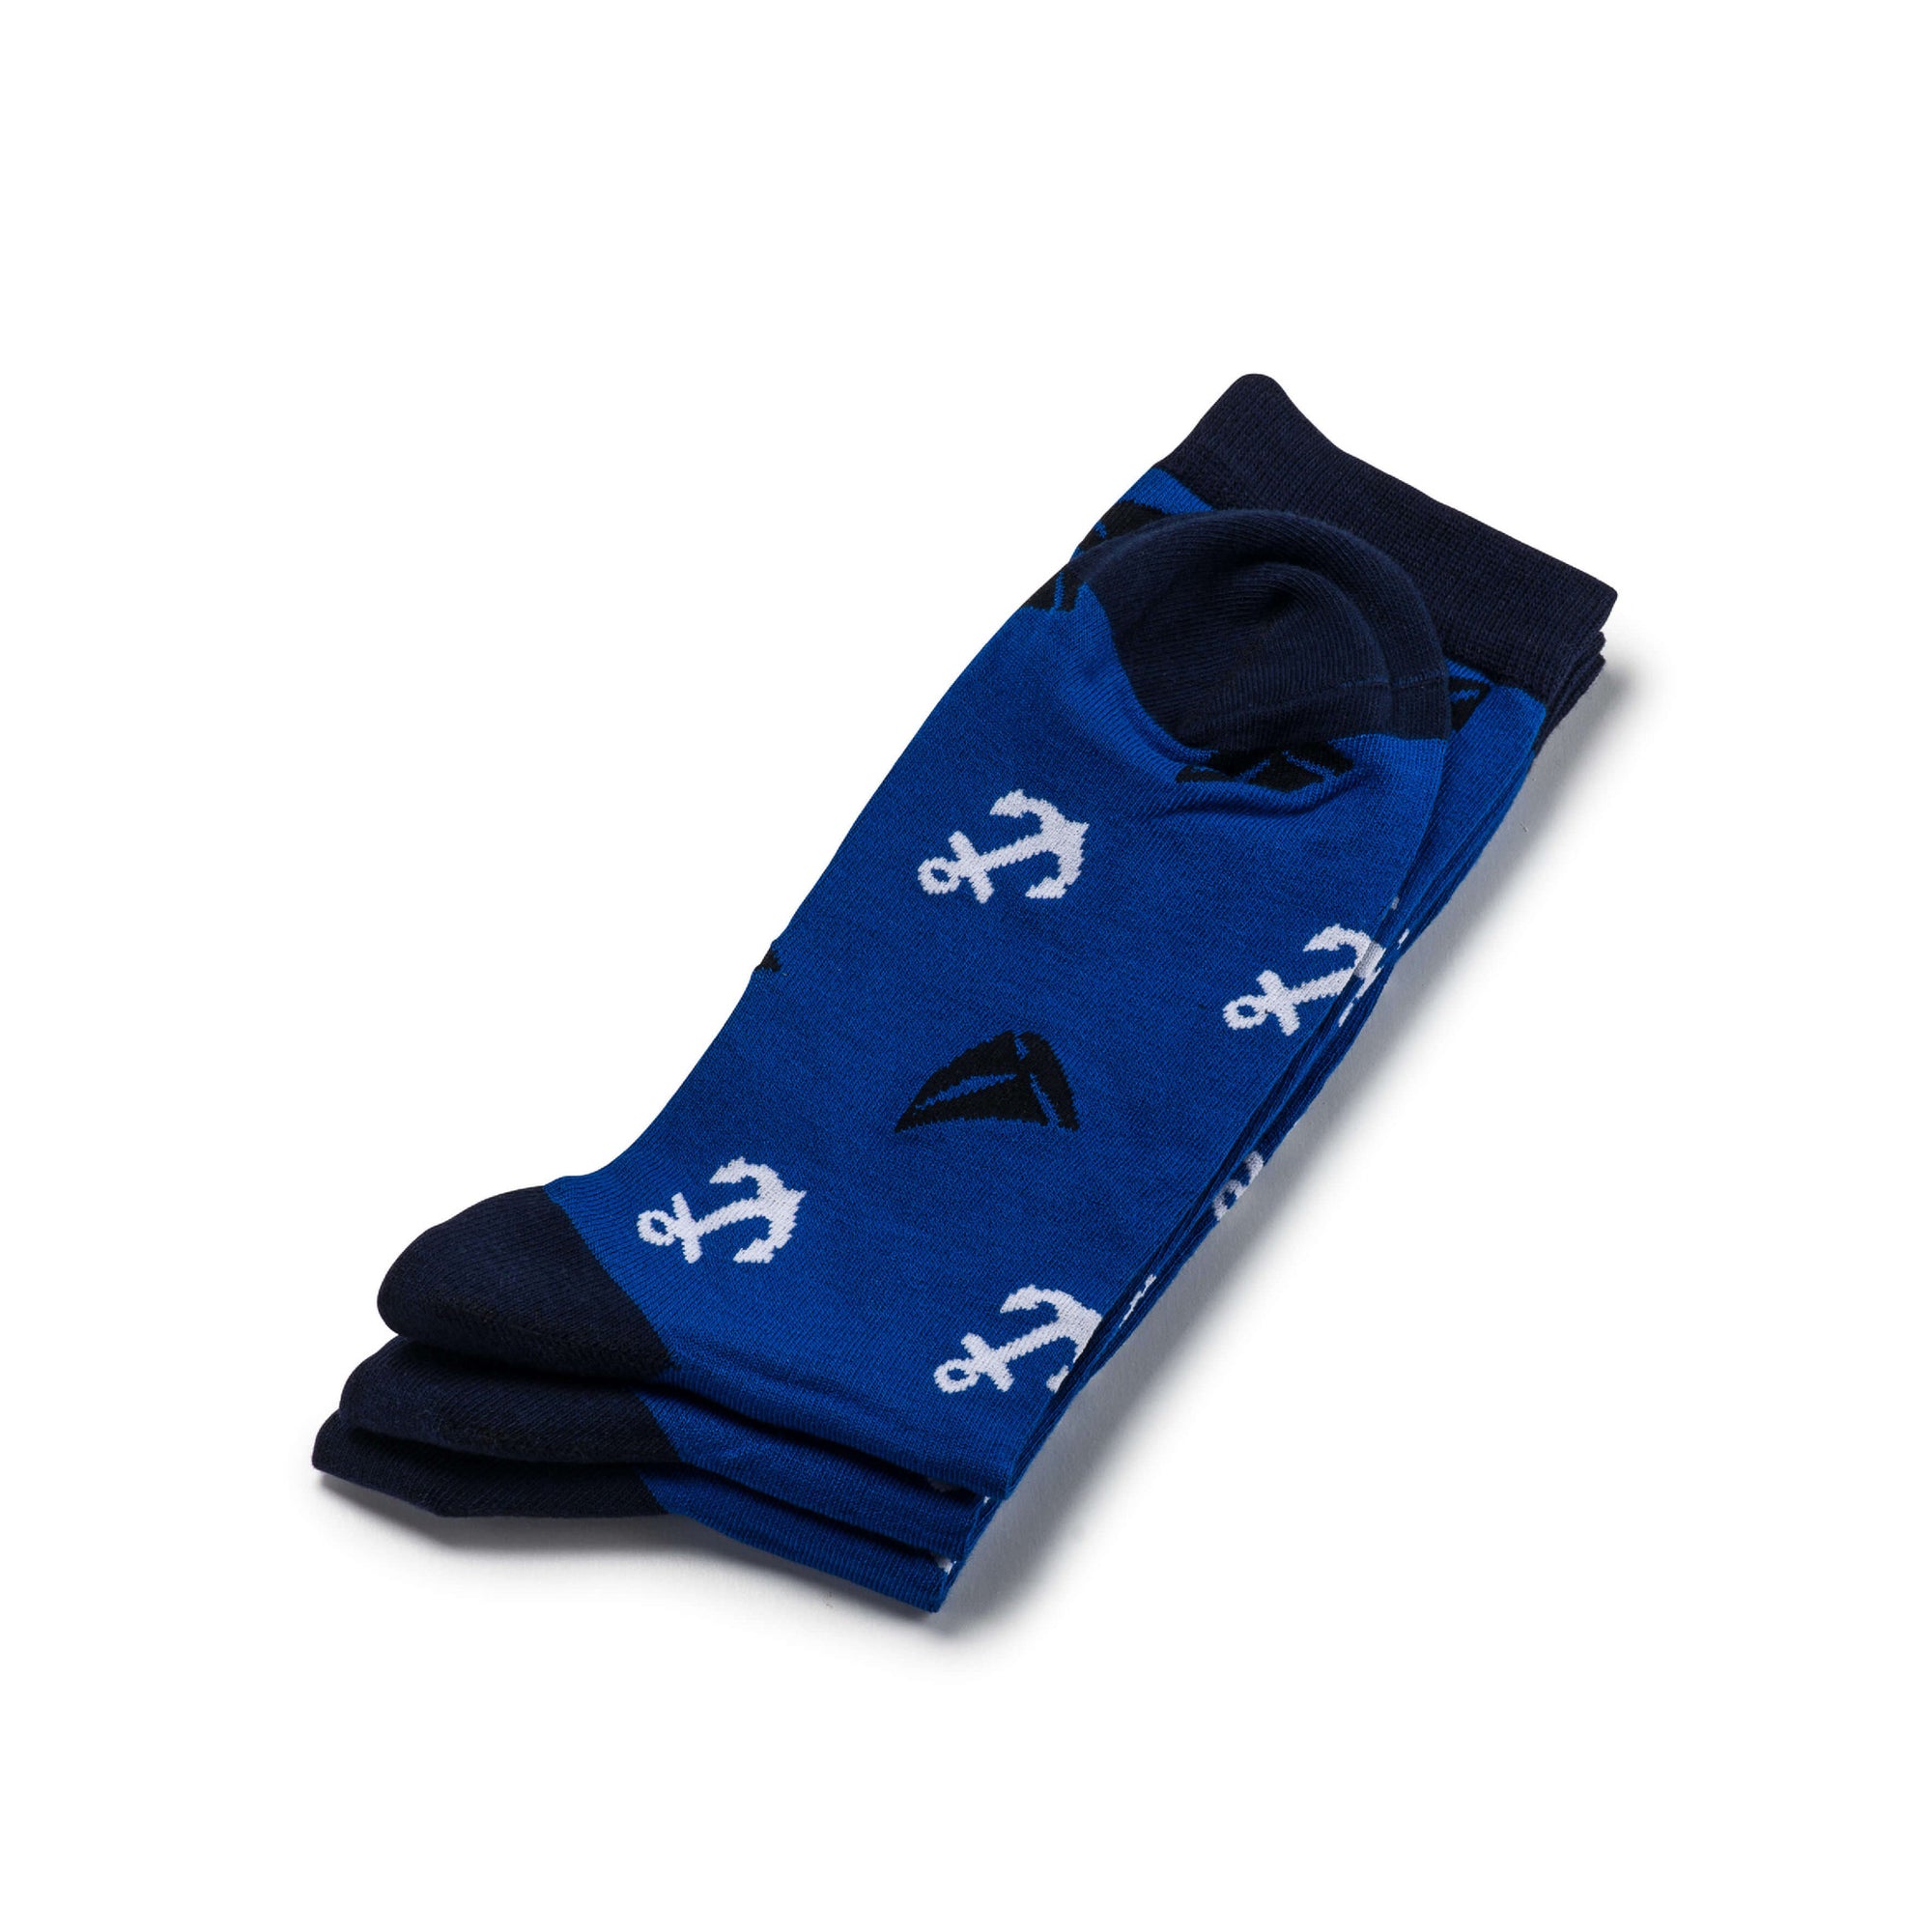 Colorful Abyss Navy Blue and White Bamboo Socks with sailboats and anchors